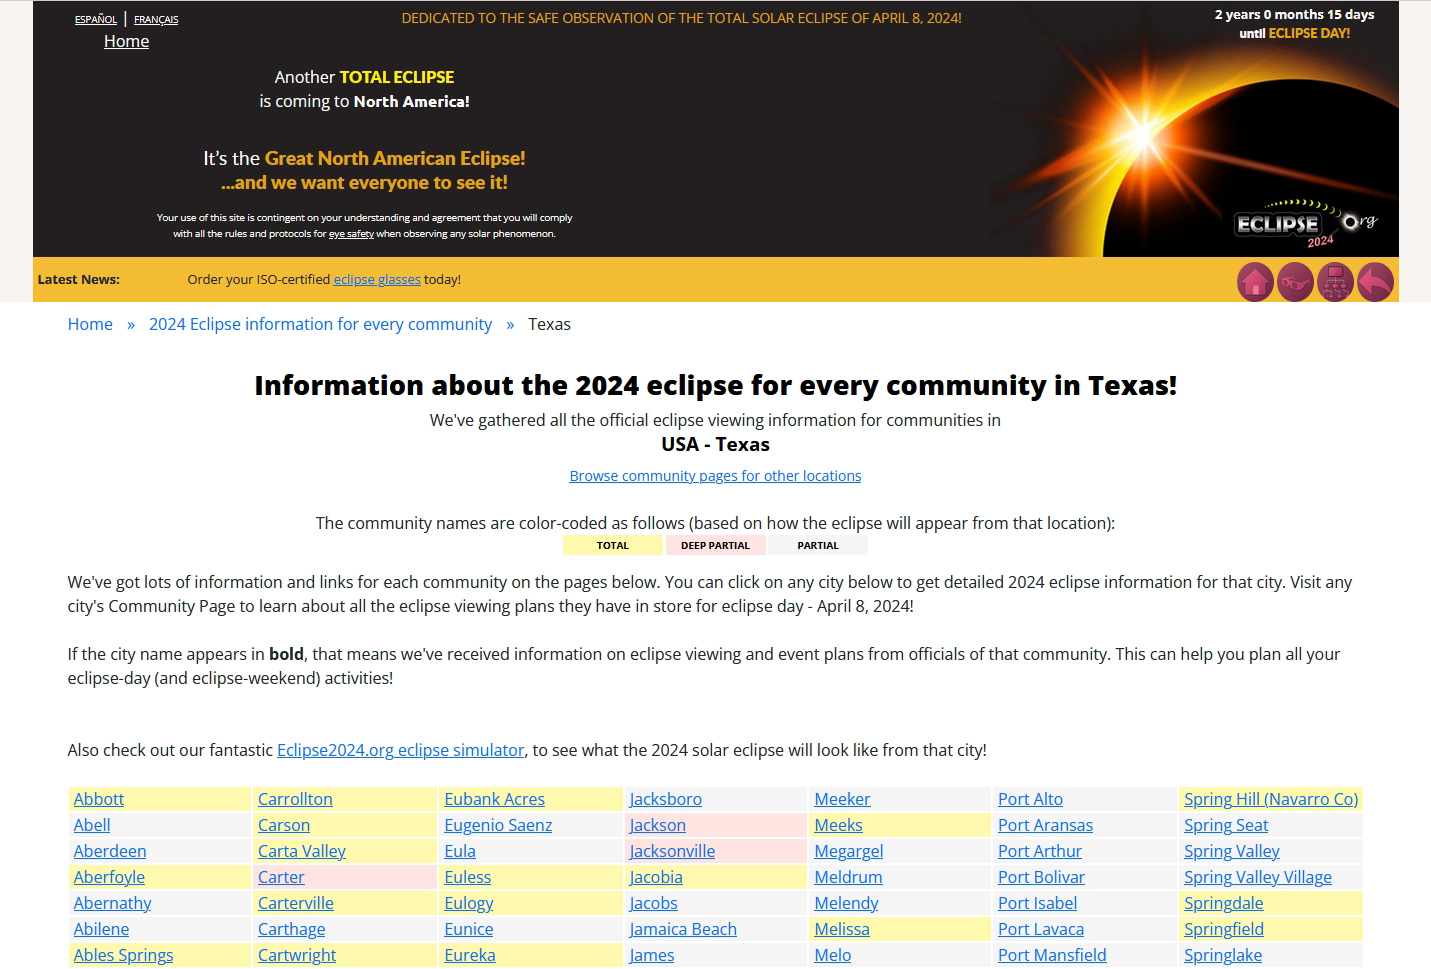 Eclipse2024.org's Community Pages